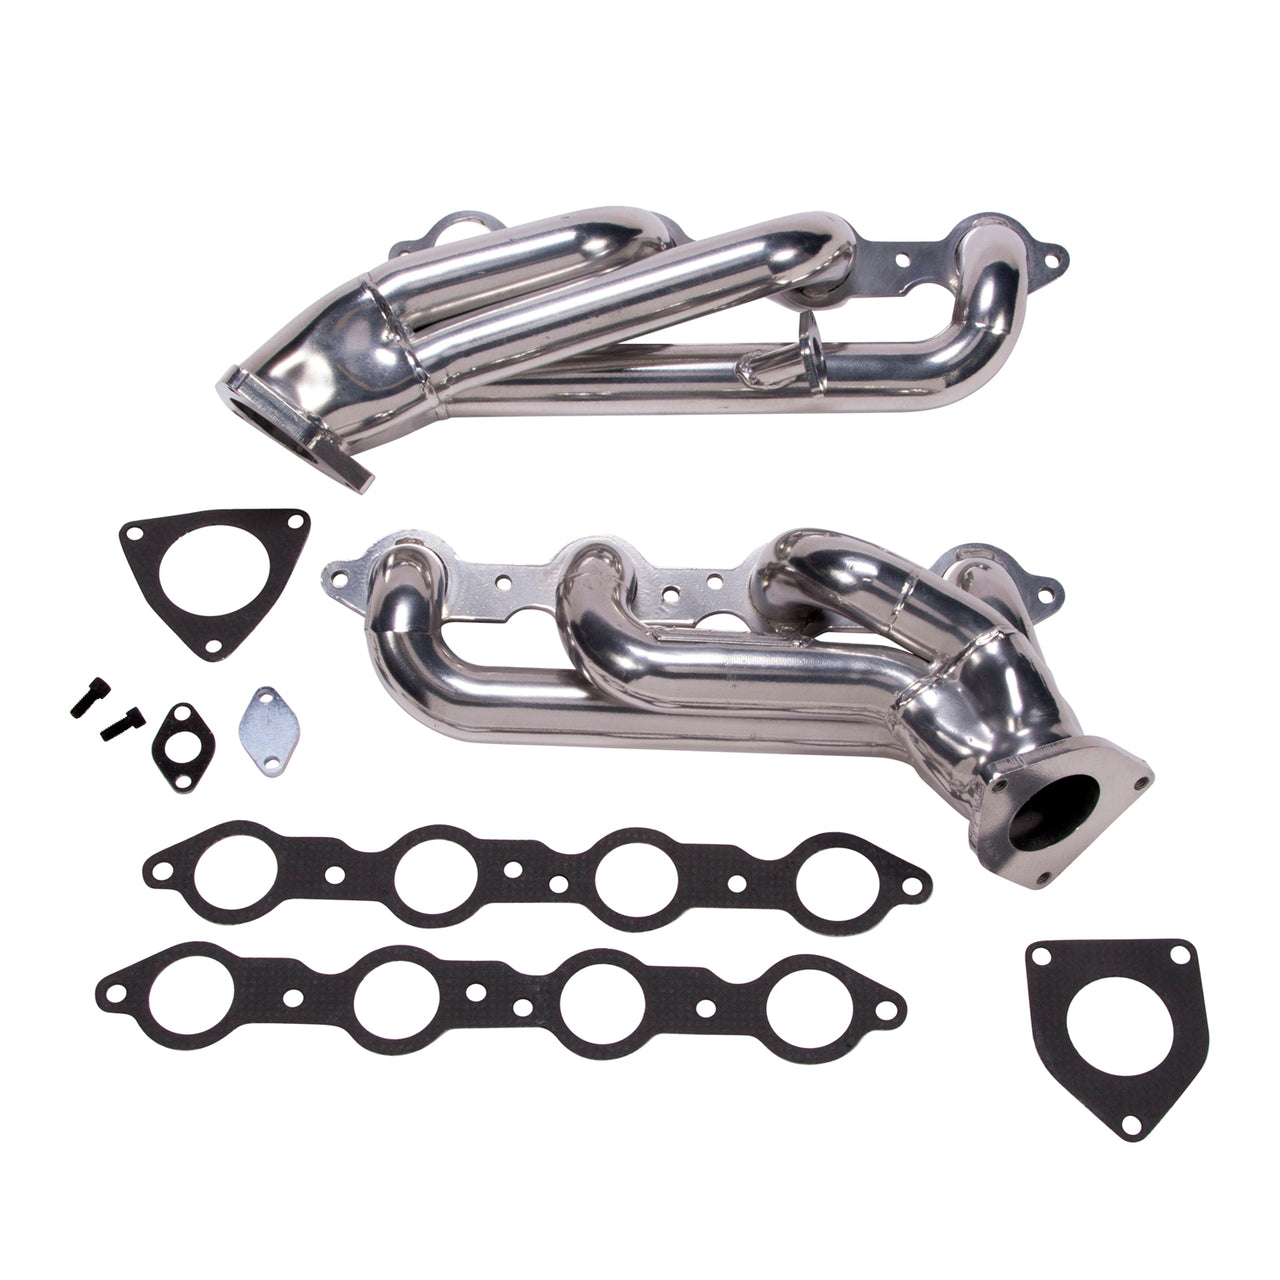 1999-2013 GM TRUCK/SUV 6.0L 1-3/4 SHORTY HEADERS (POLISHED SILVER CERAMIC)